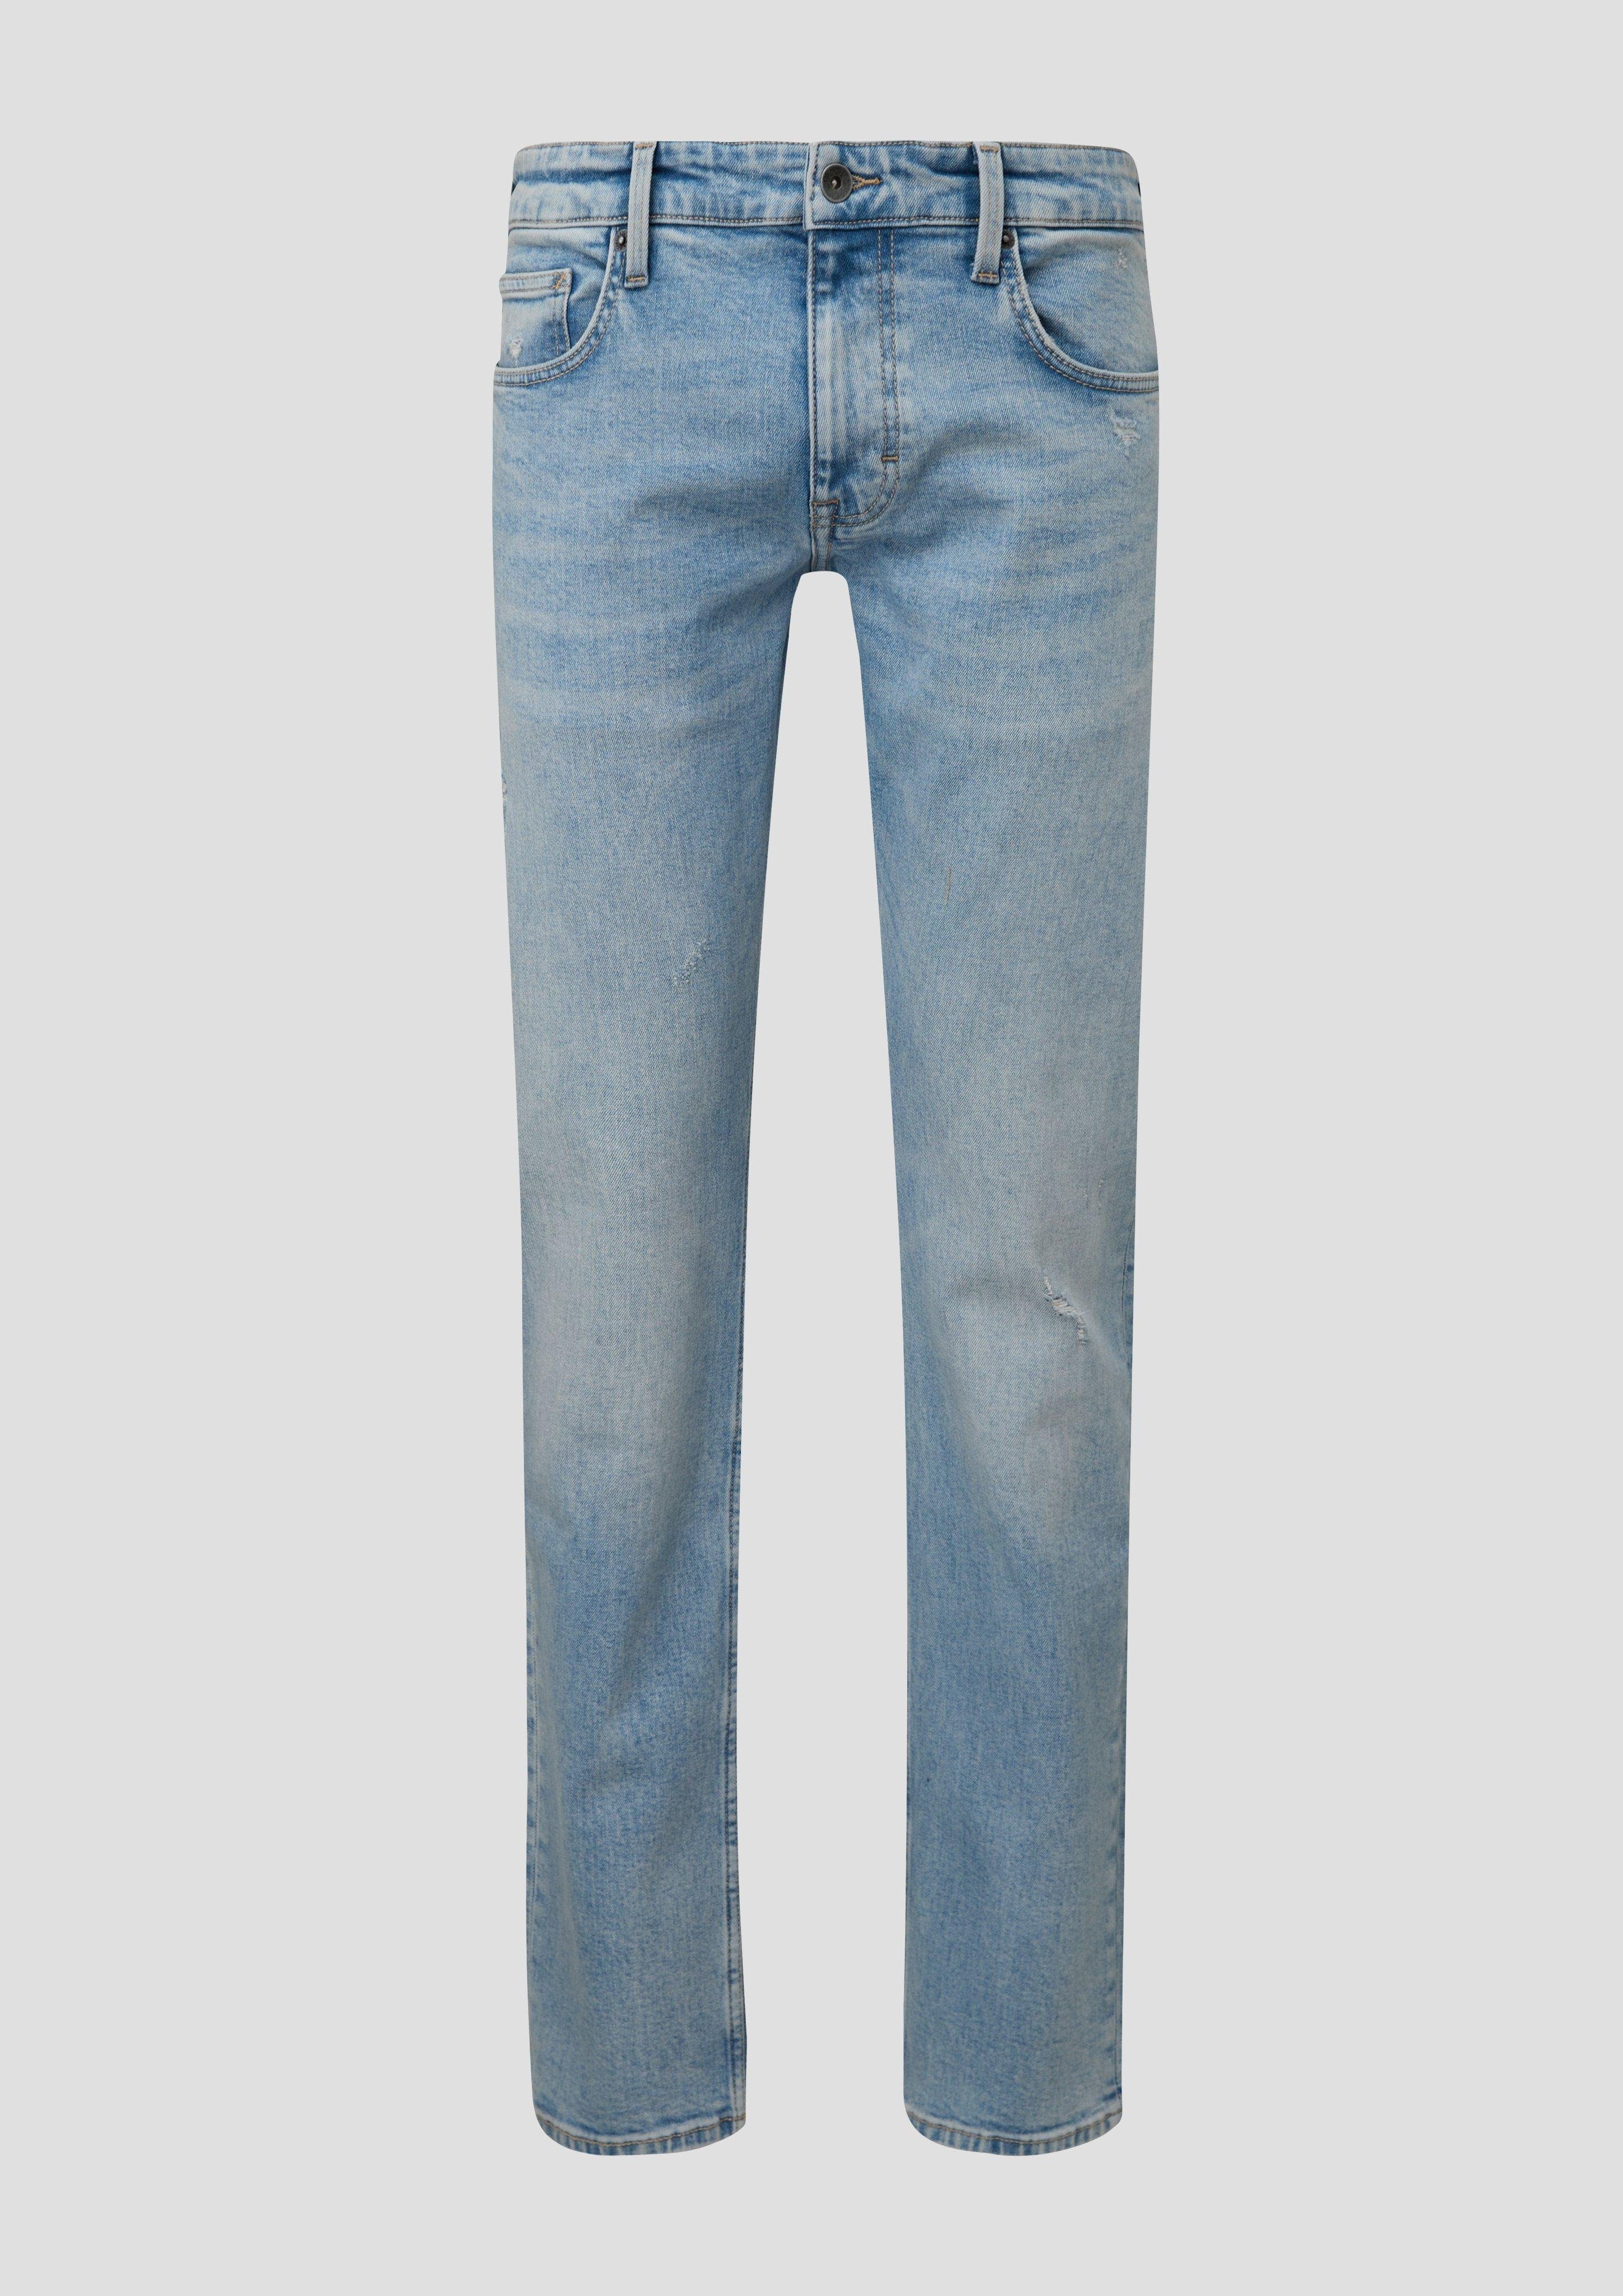 Waschung, Fit / QS / Jeans / Mid Slim Destroyes Rise Leg Rick Slim Stoffhose